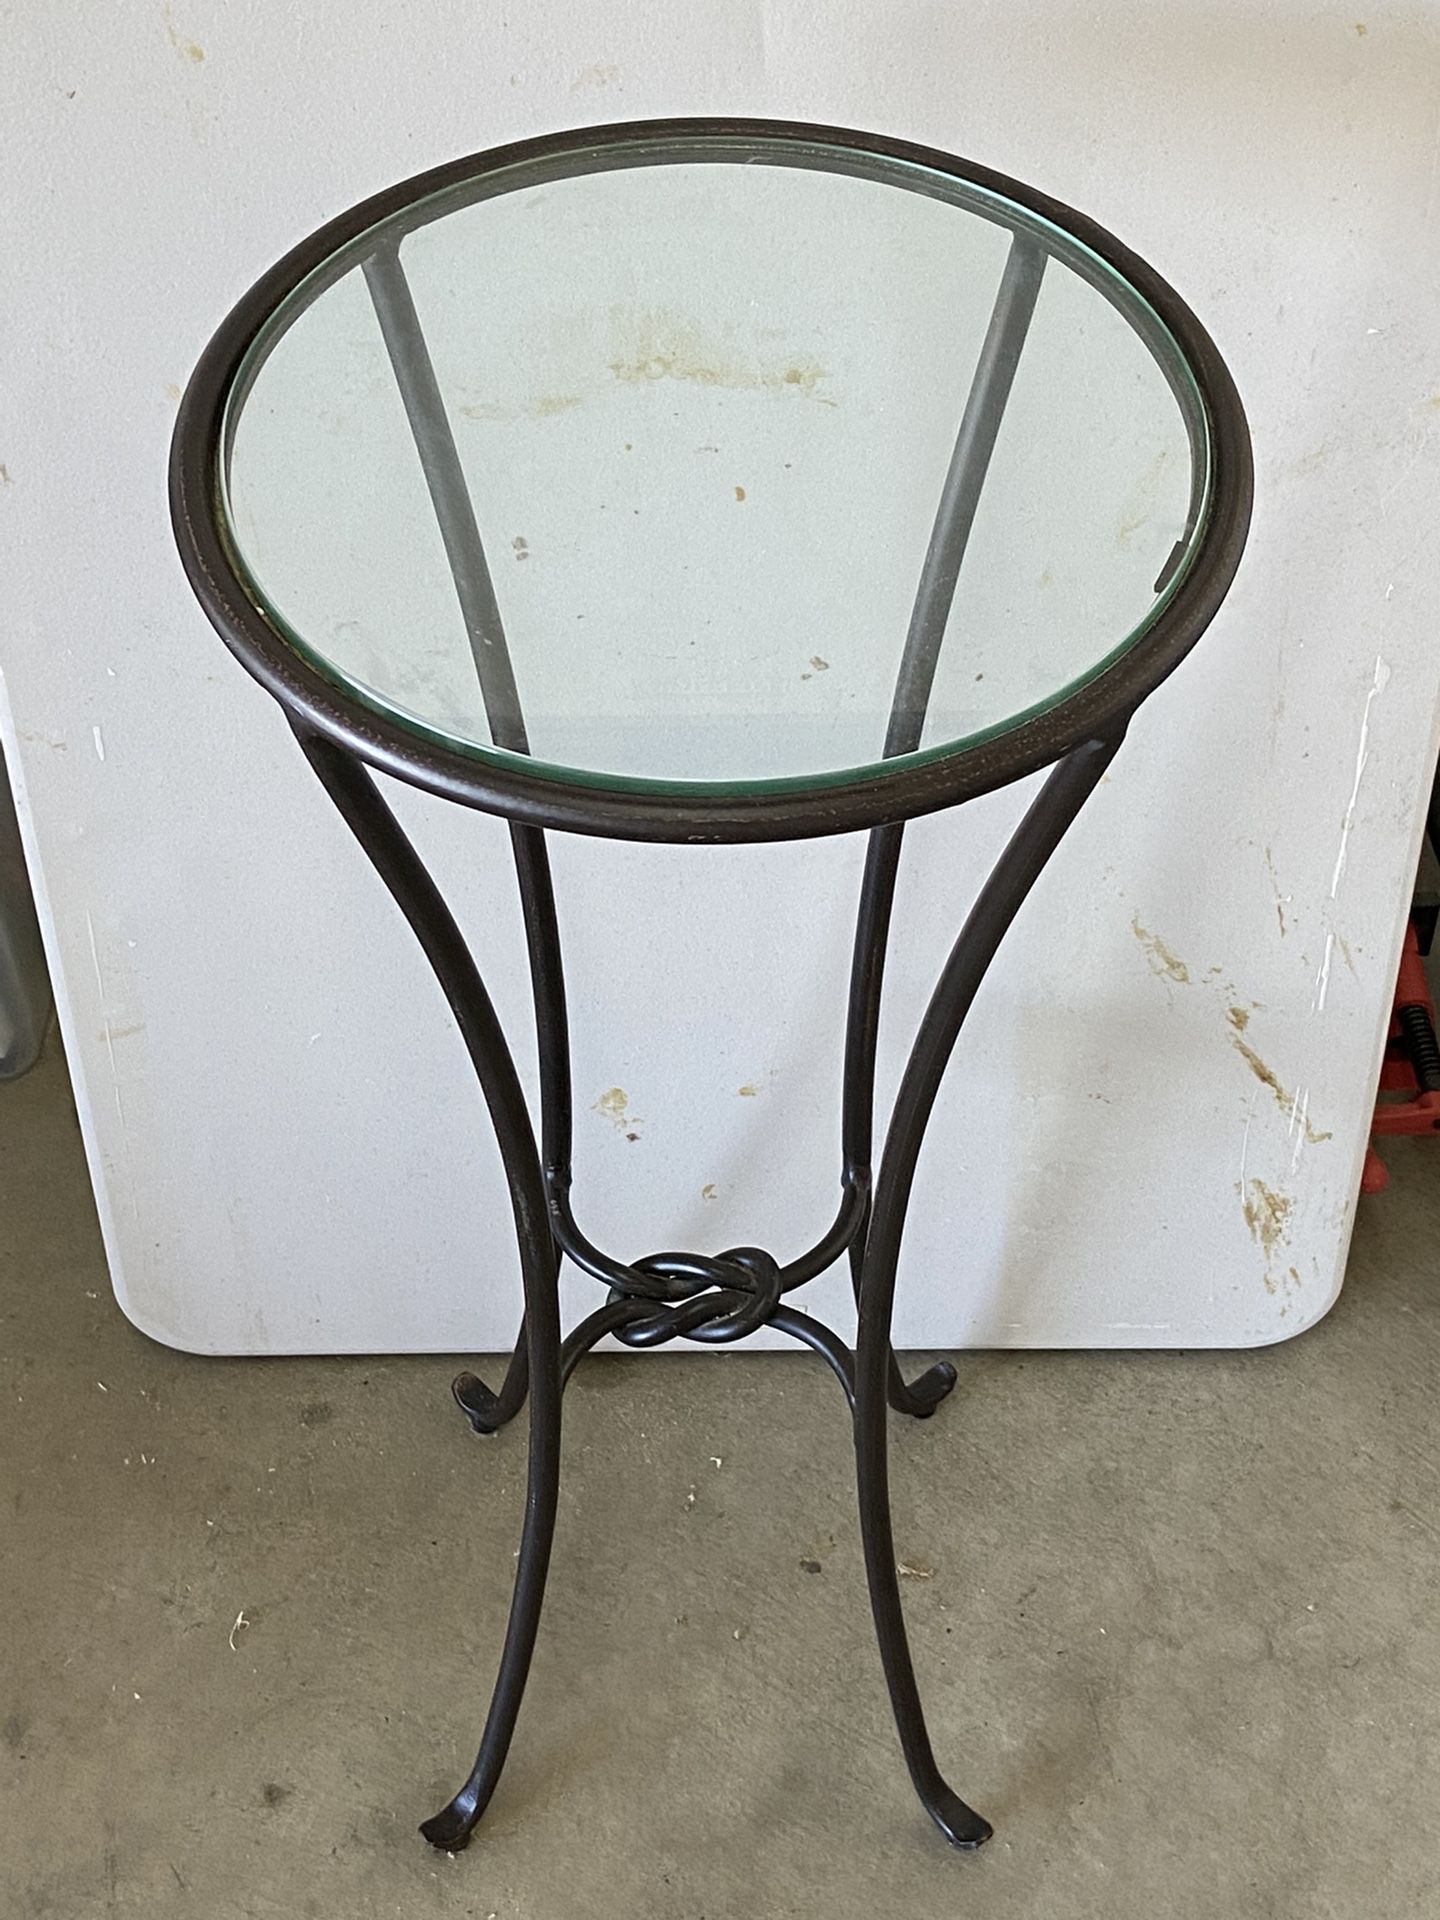 2—New Door Frame Fans( Or Use On A Table) for Sale in Kenmore, WA - OfferUp